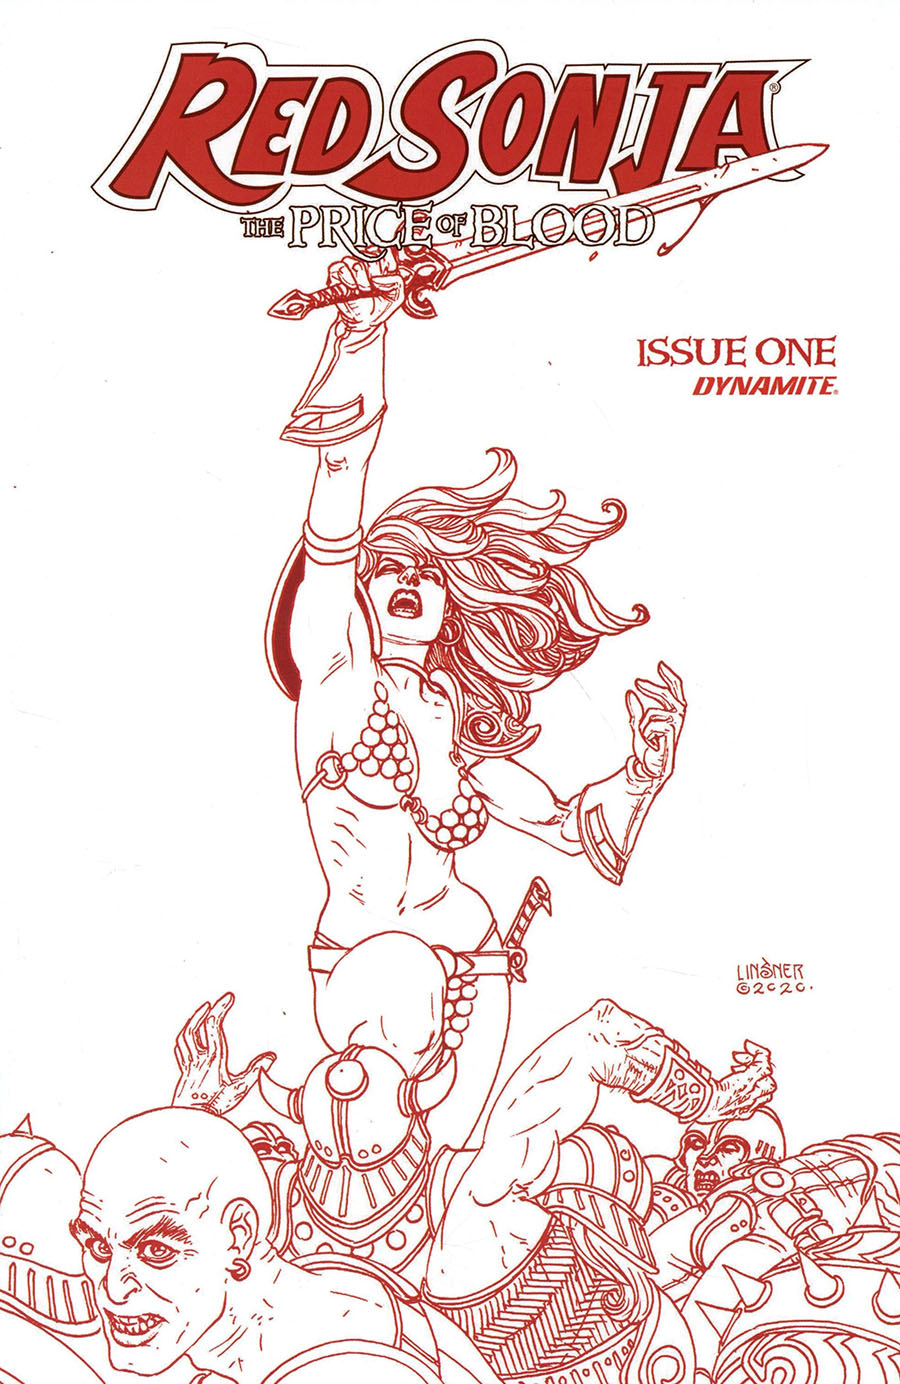 Red Sonja Price Of Blood #1 Cover T Ultra-Premium Limited Edition Joseph Michael Linsner Crimson Red Line Art Cover